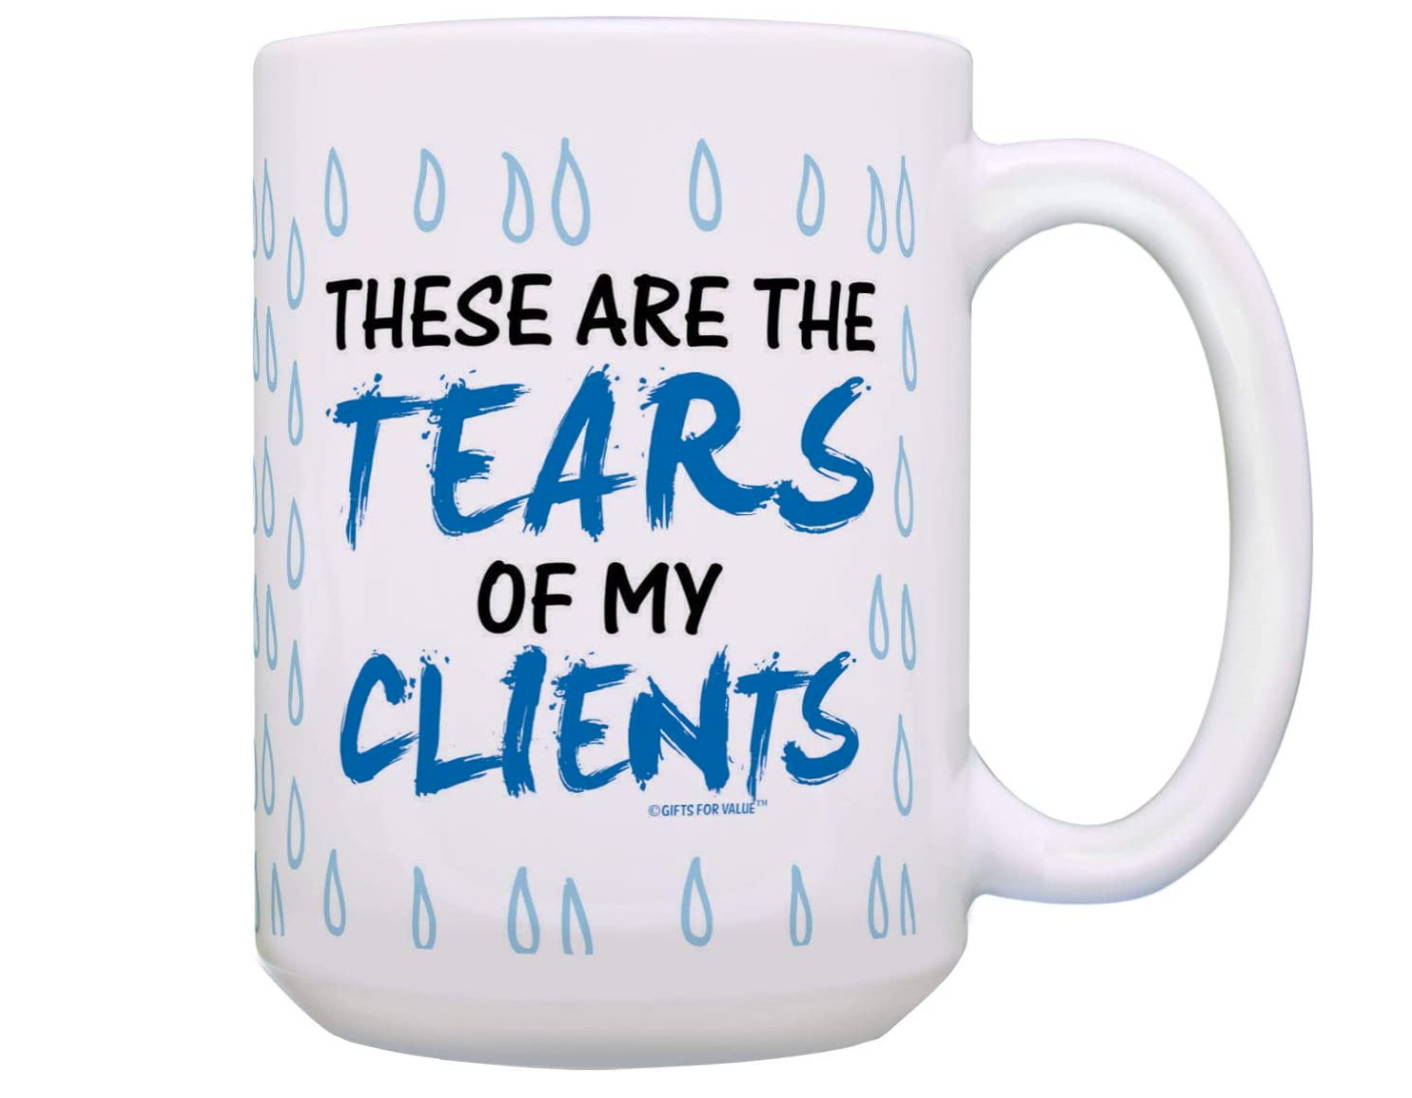 These Are The Tears Of My Clients